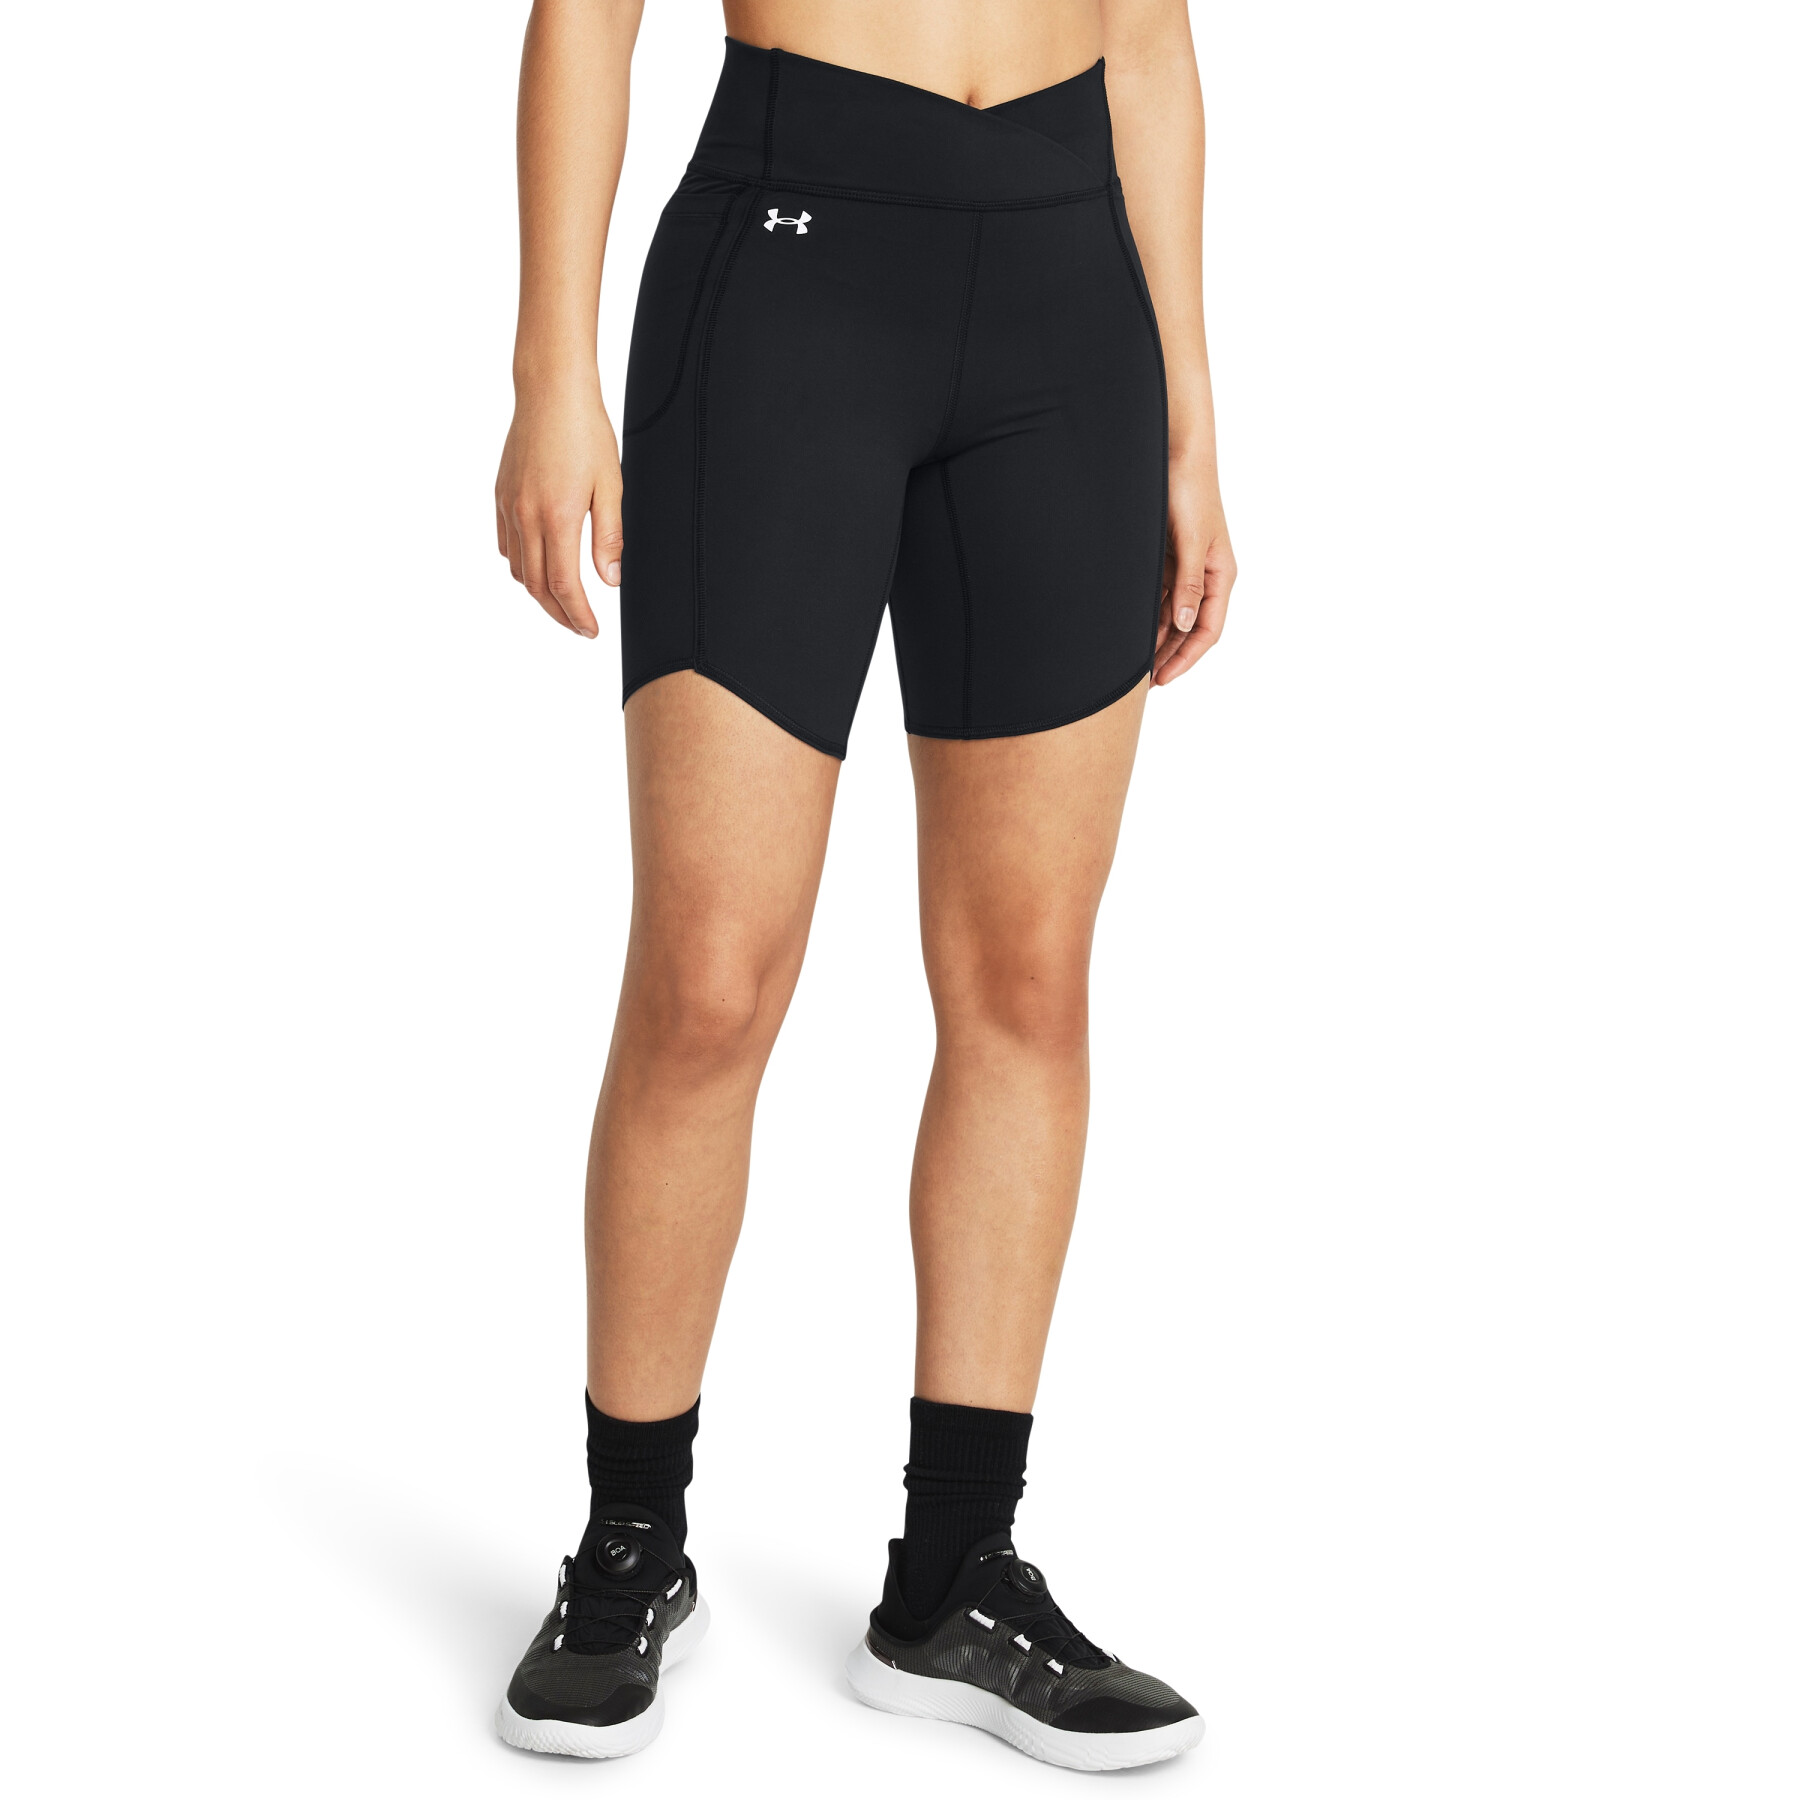 Cuissard femme Under Armour Motion Crossover Bike